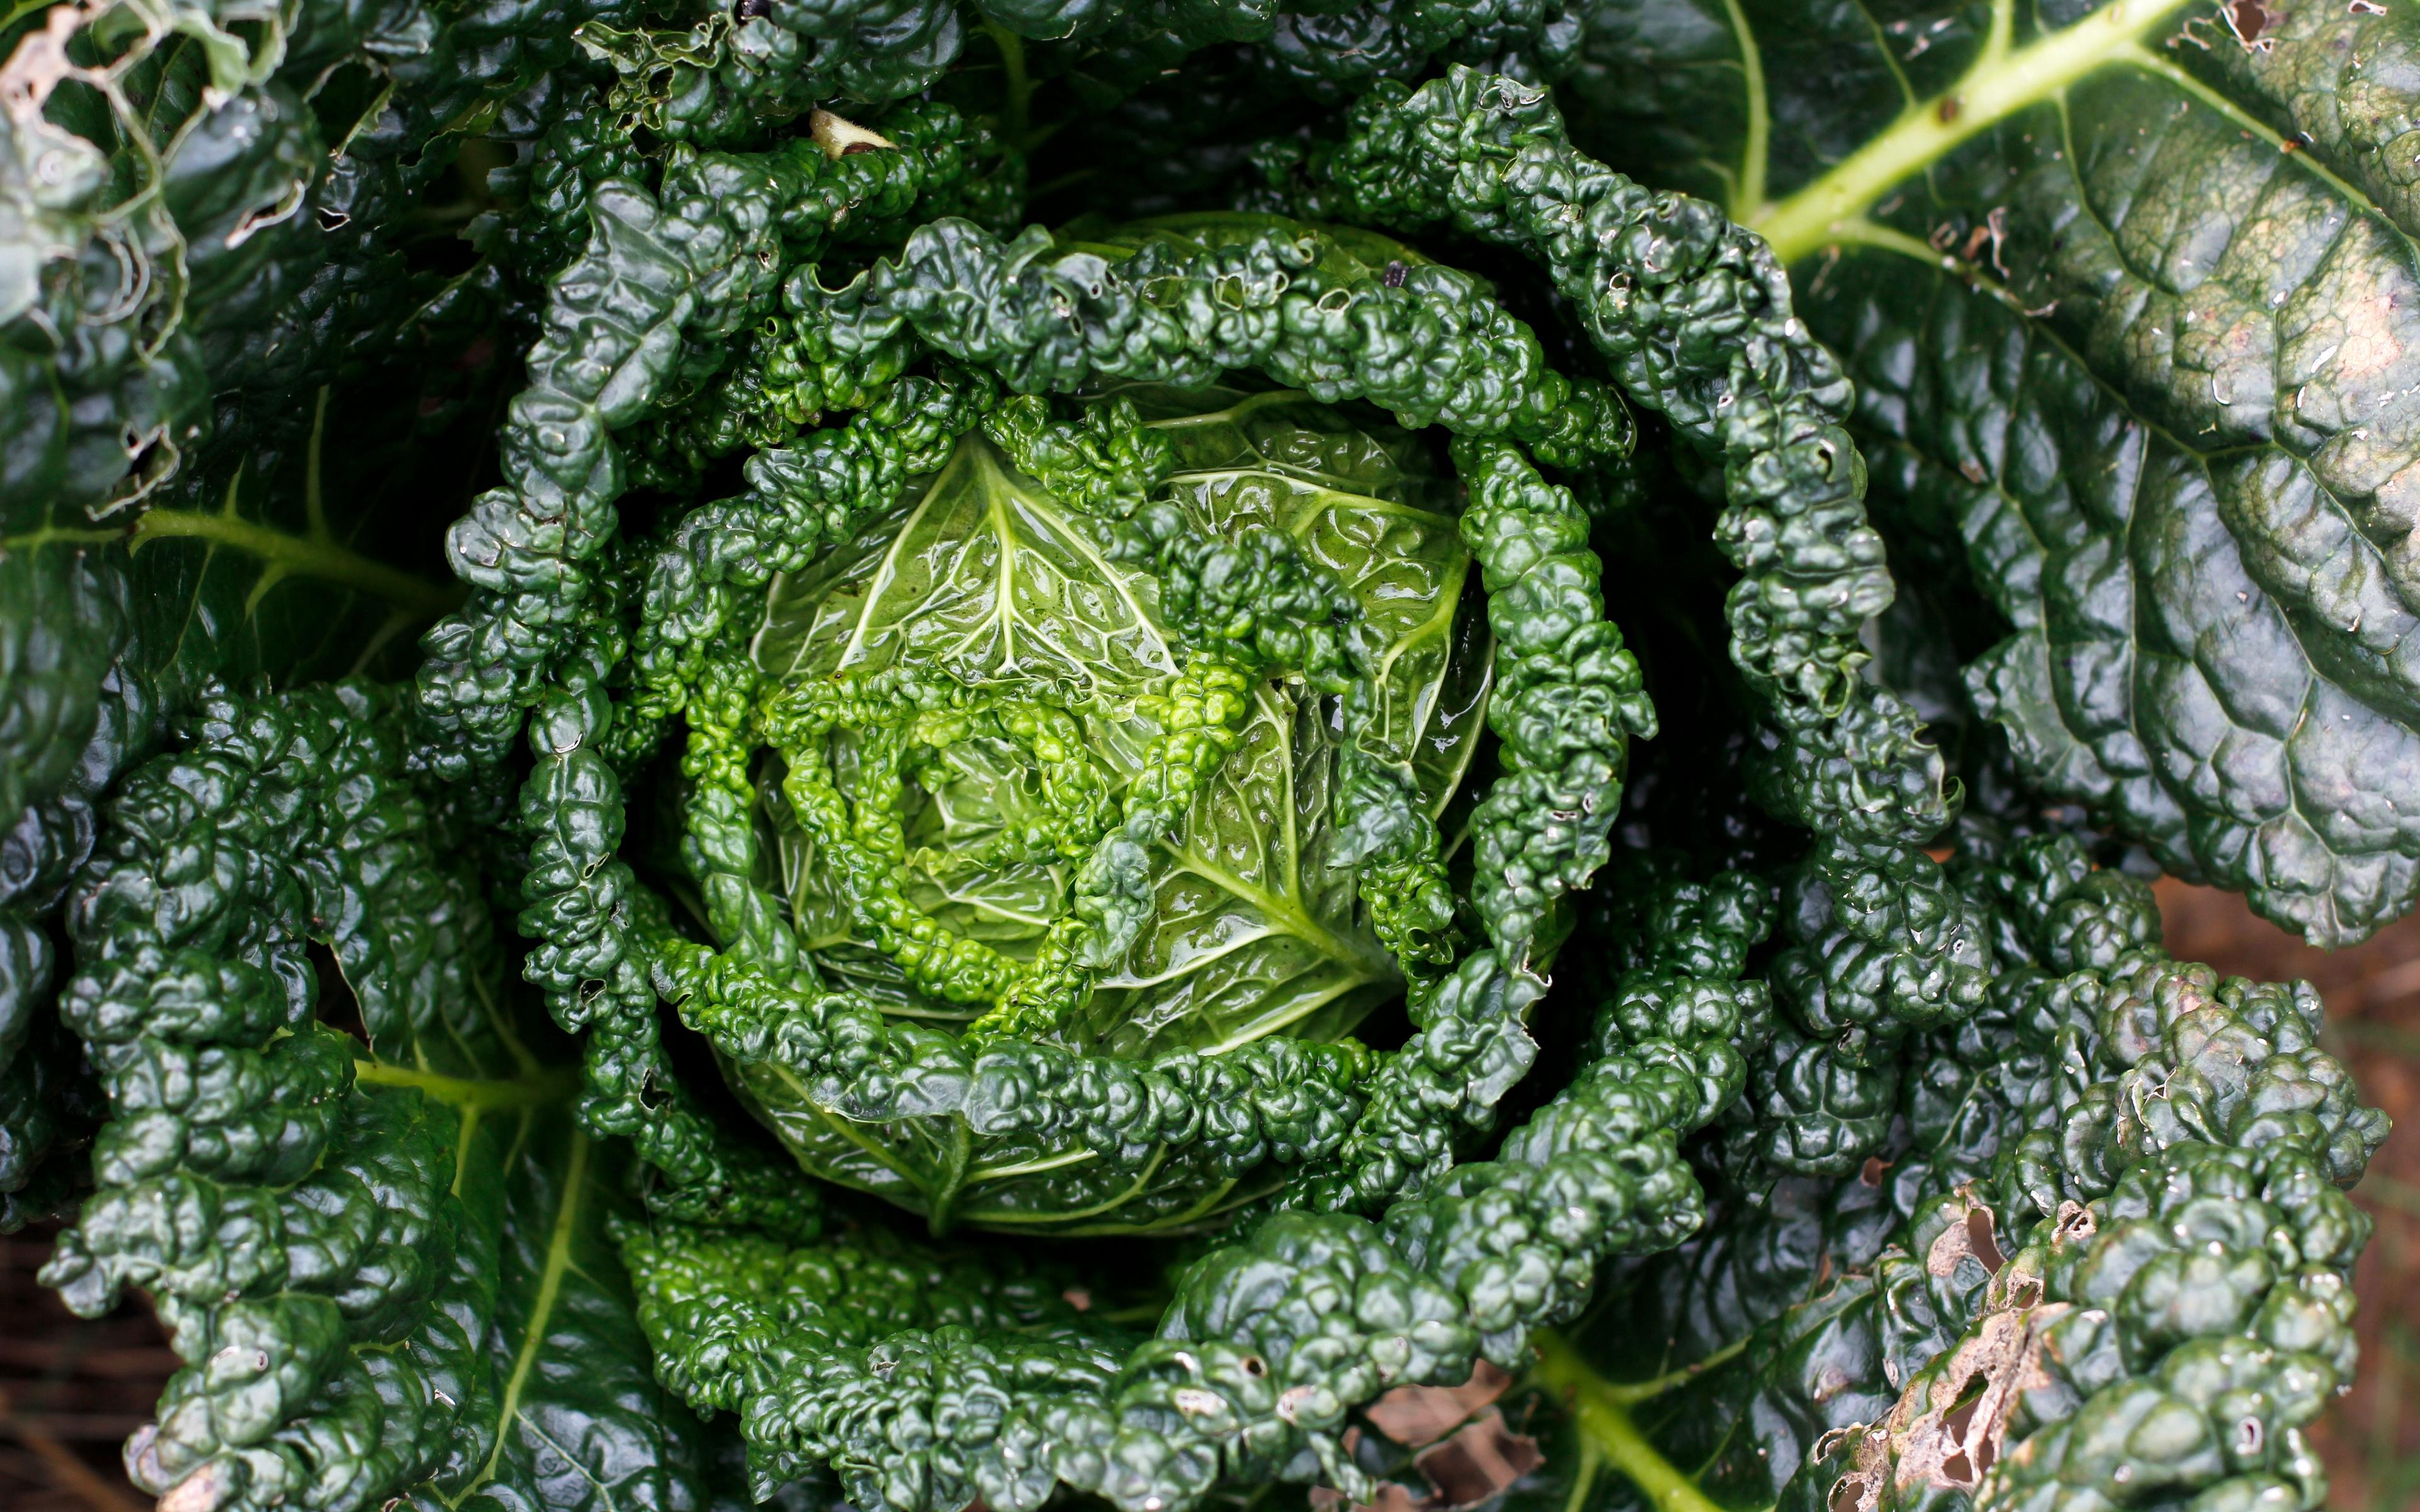 Download Wallpaper 3840x2400 Cabbage, Greens, Leaves, Close Up 4k